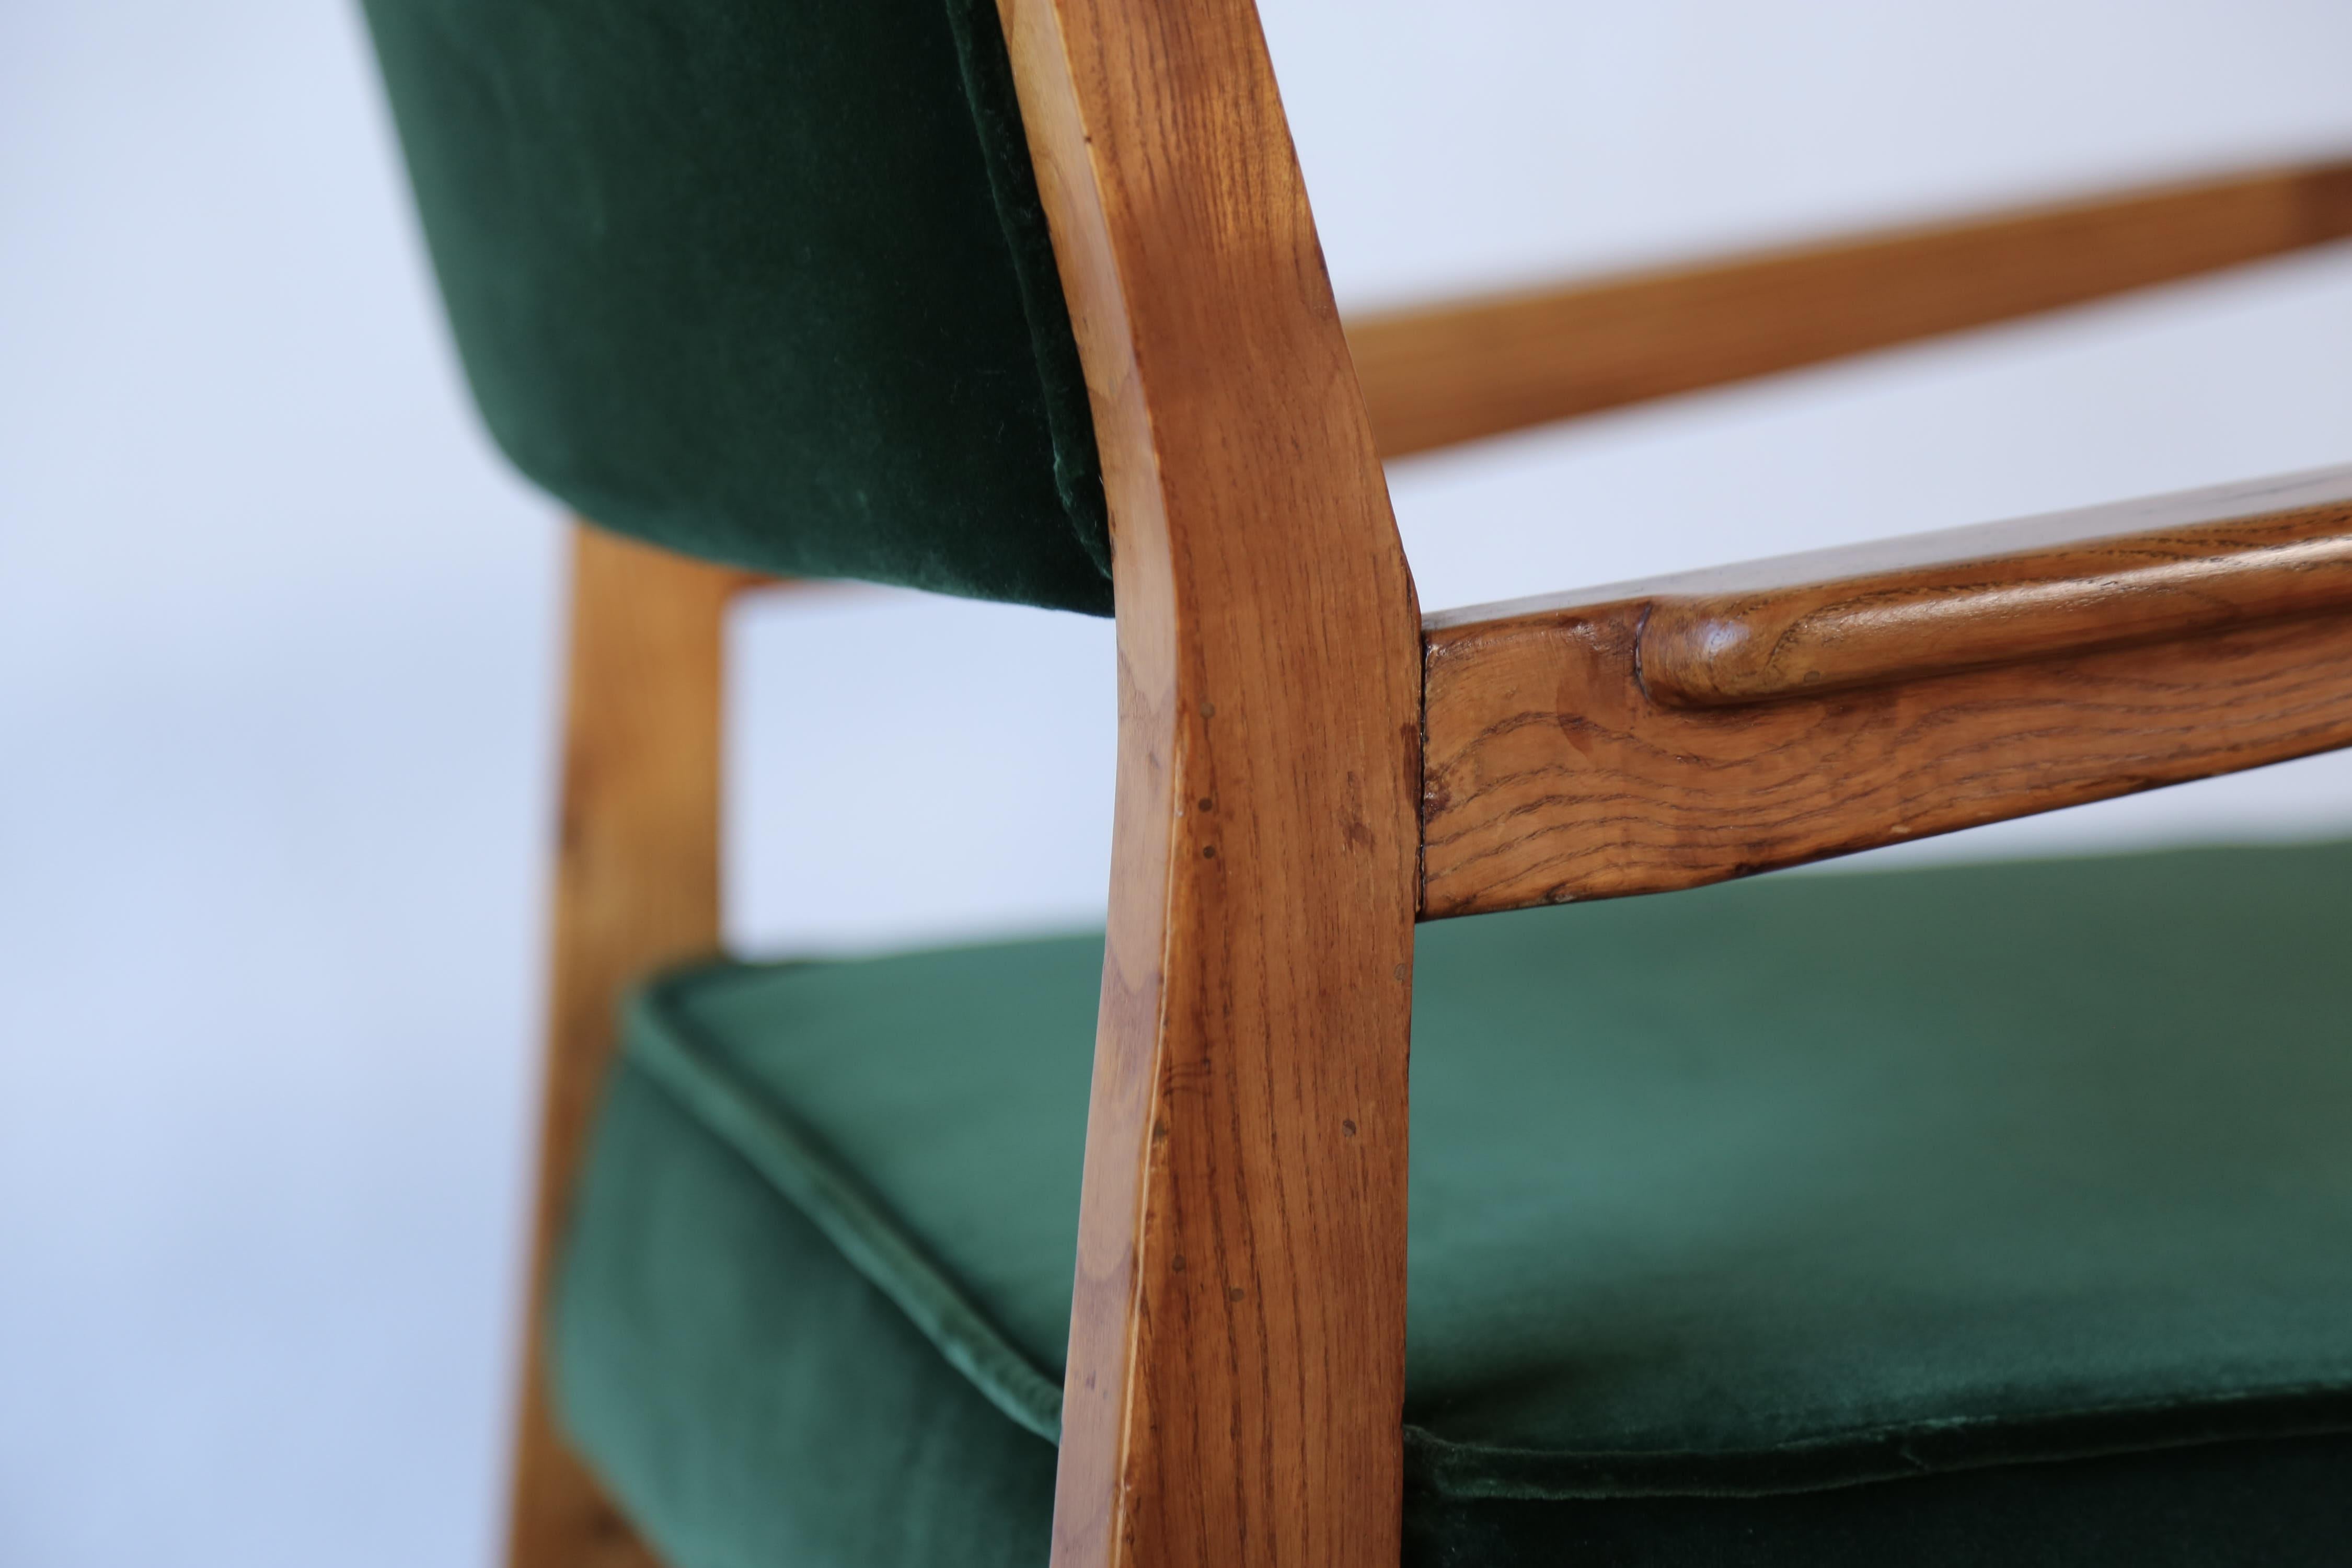 Rare Early Gio Ponti Chair, Giordano Chiesa, Italy, 1950s For Sale 9